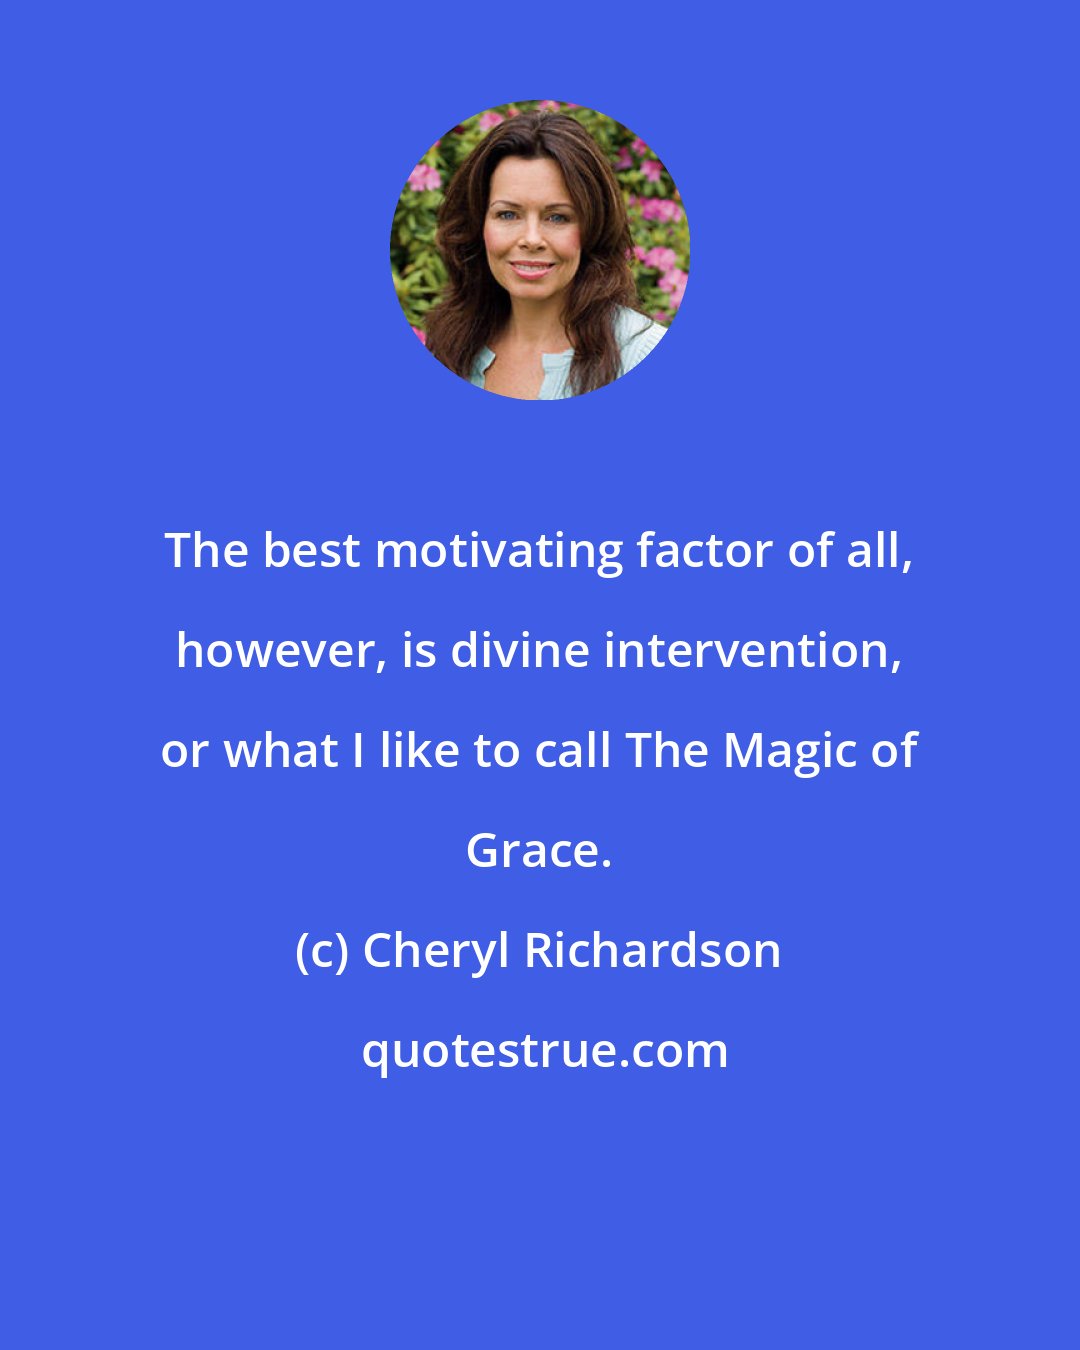 Cheryl Richardson: The best motivating factor of all, however, is divine intervention, or what I like to call The Magic of Grace.